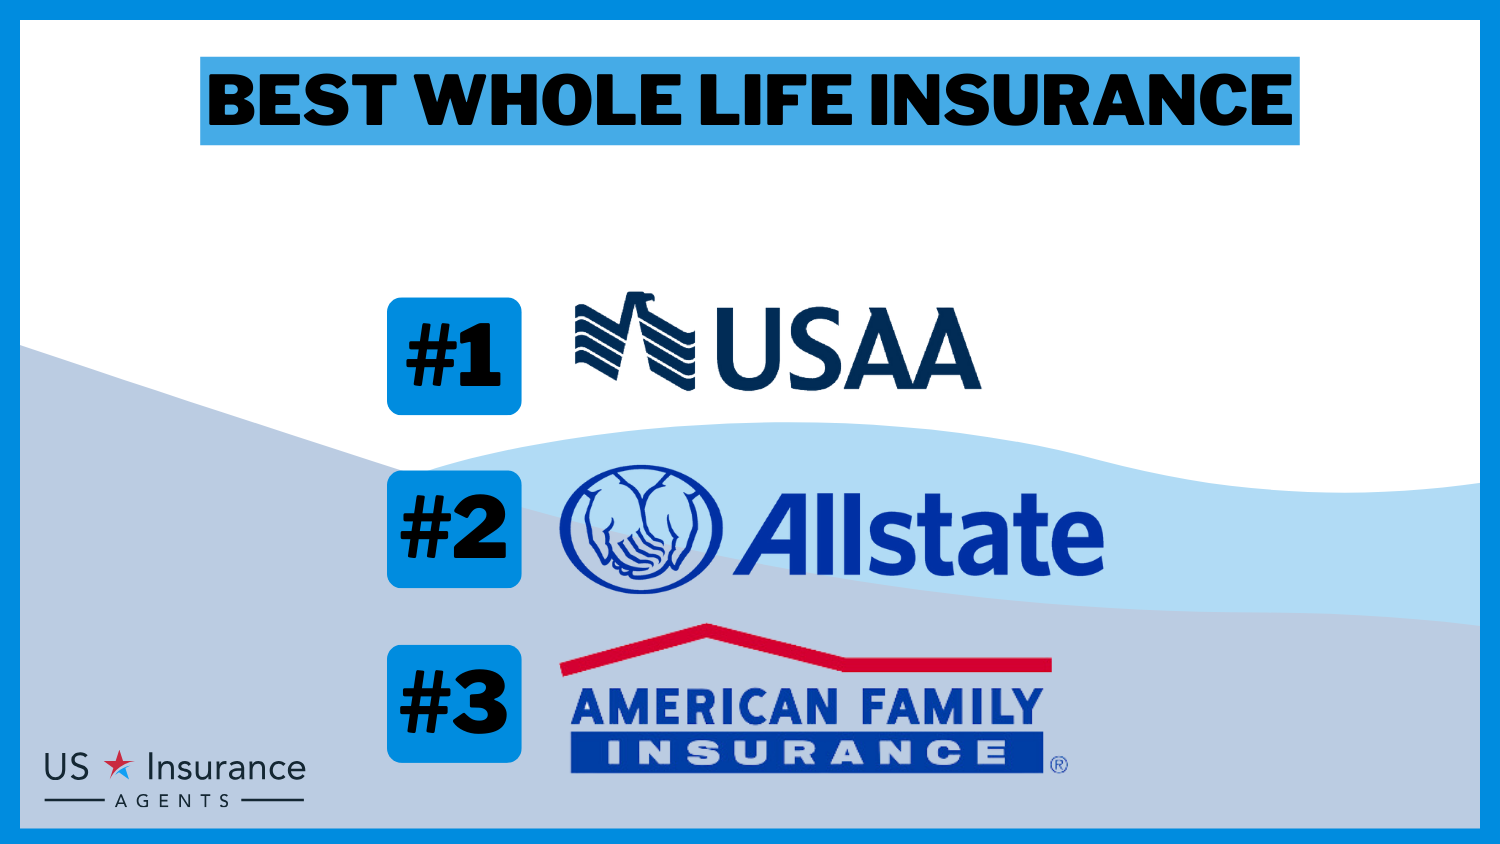 Best Whole Life Insurance : USAA, Allstate and American Family